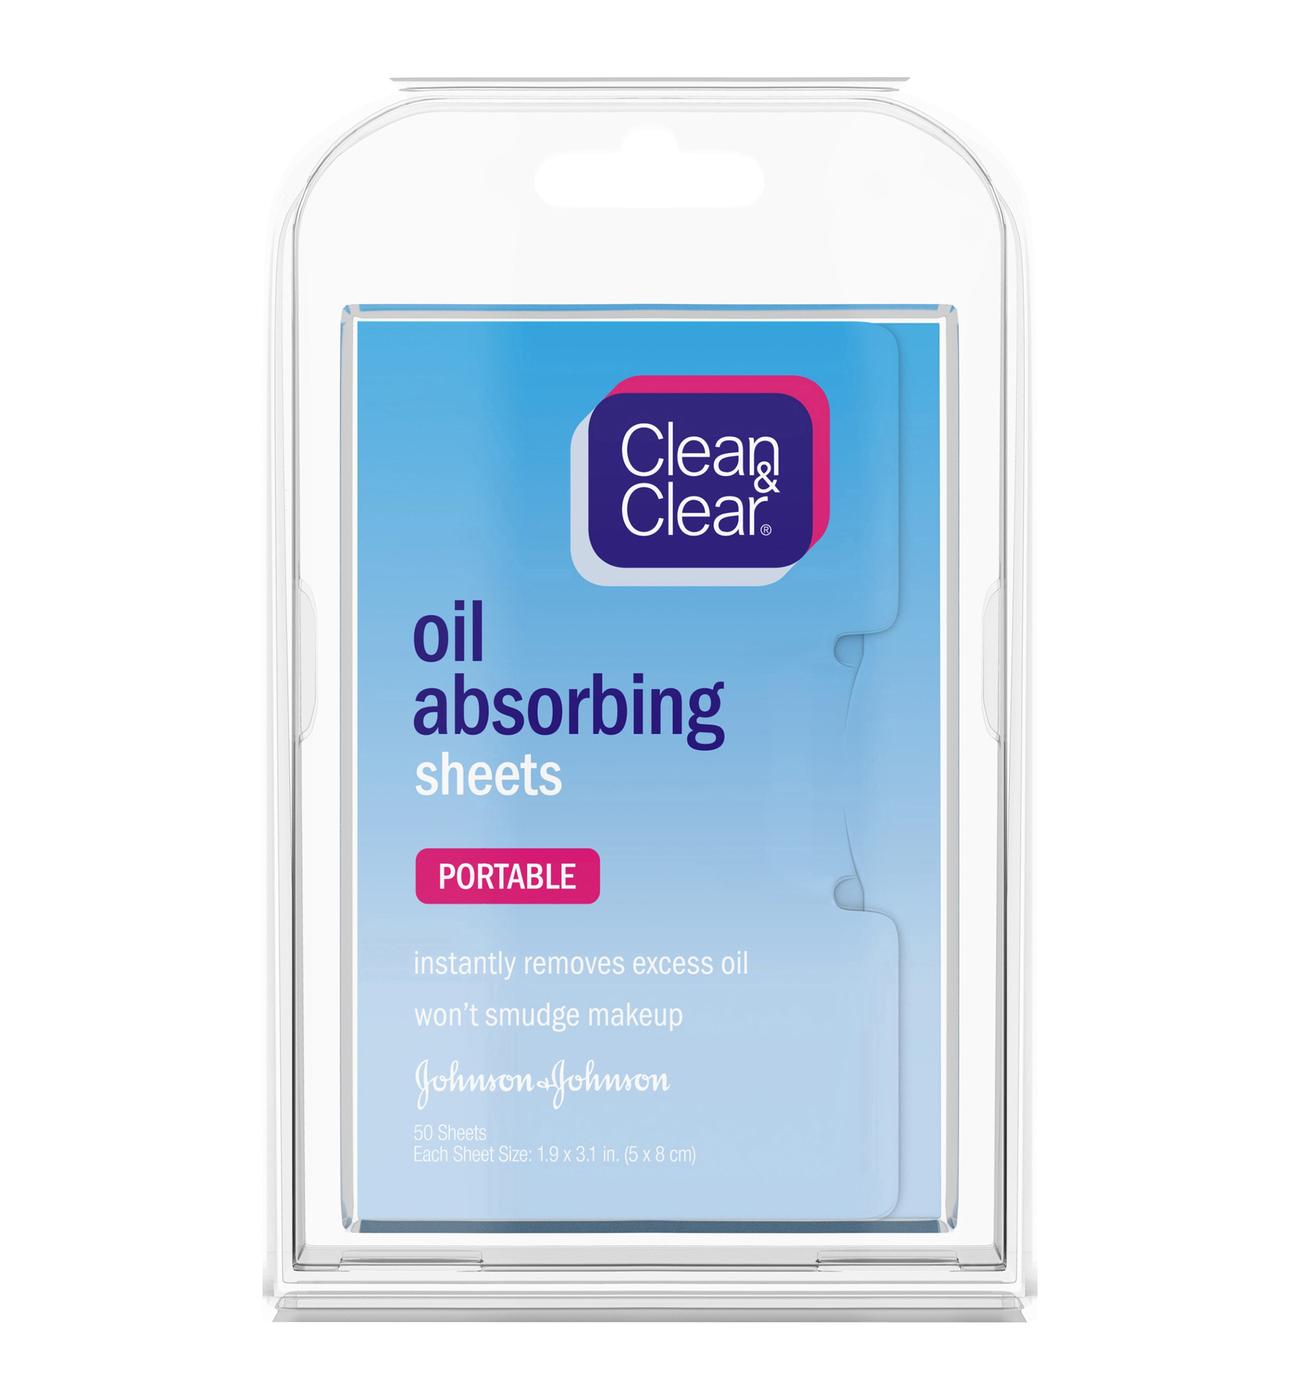 Clean & Clear Oil Absorbing Sheets; image 1 of 8